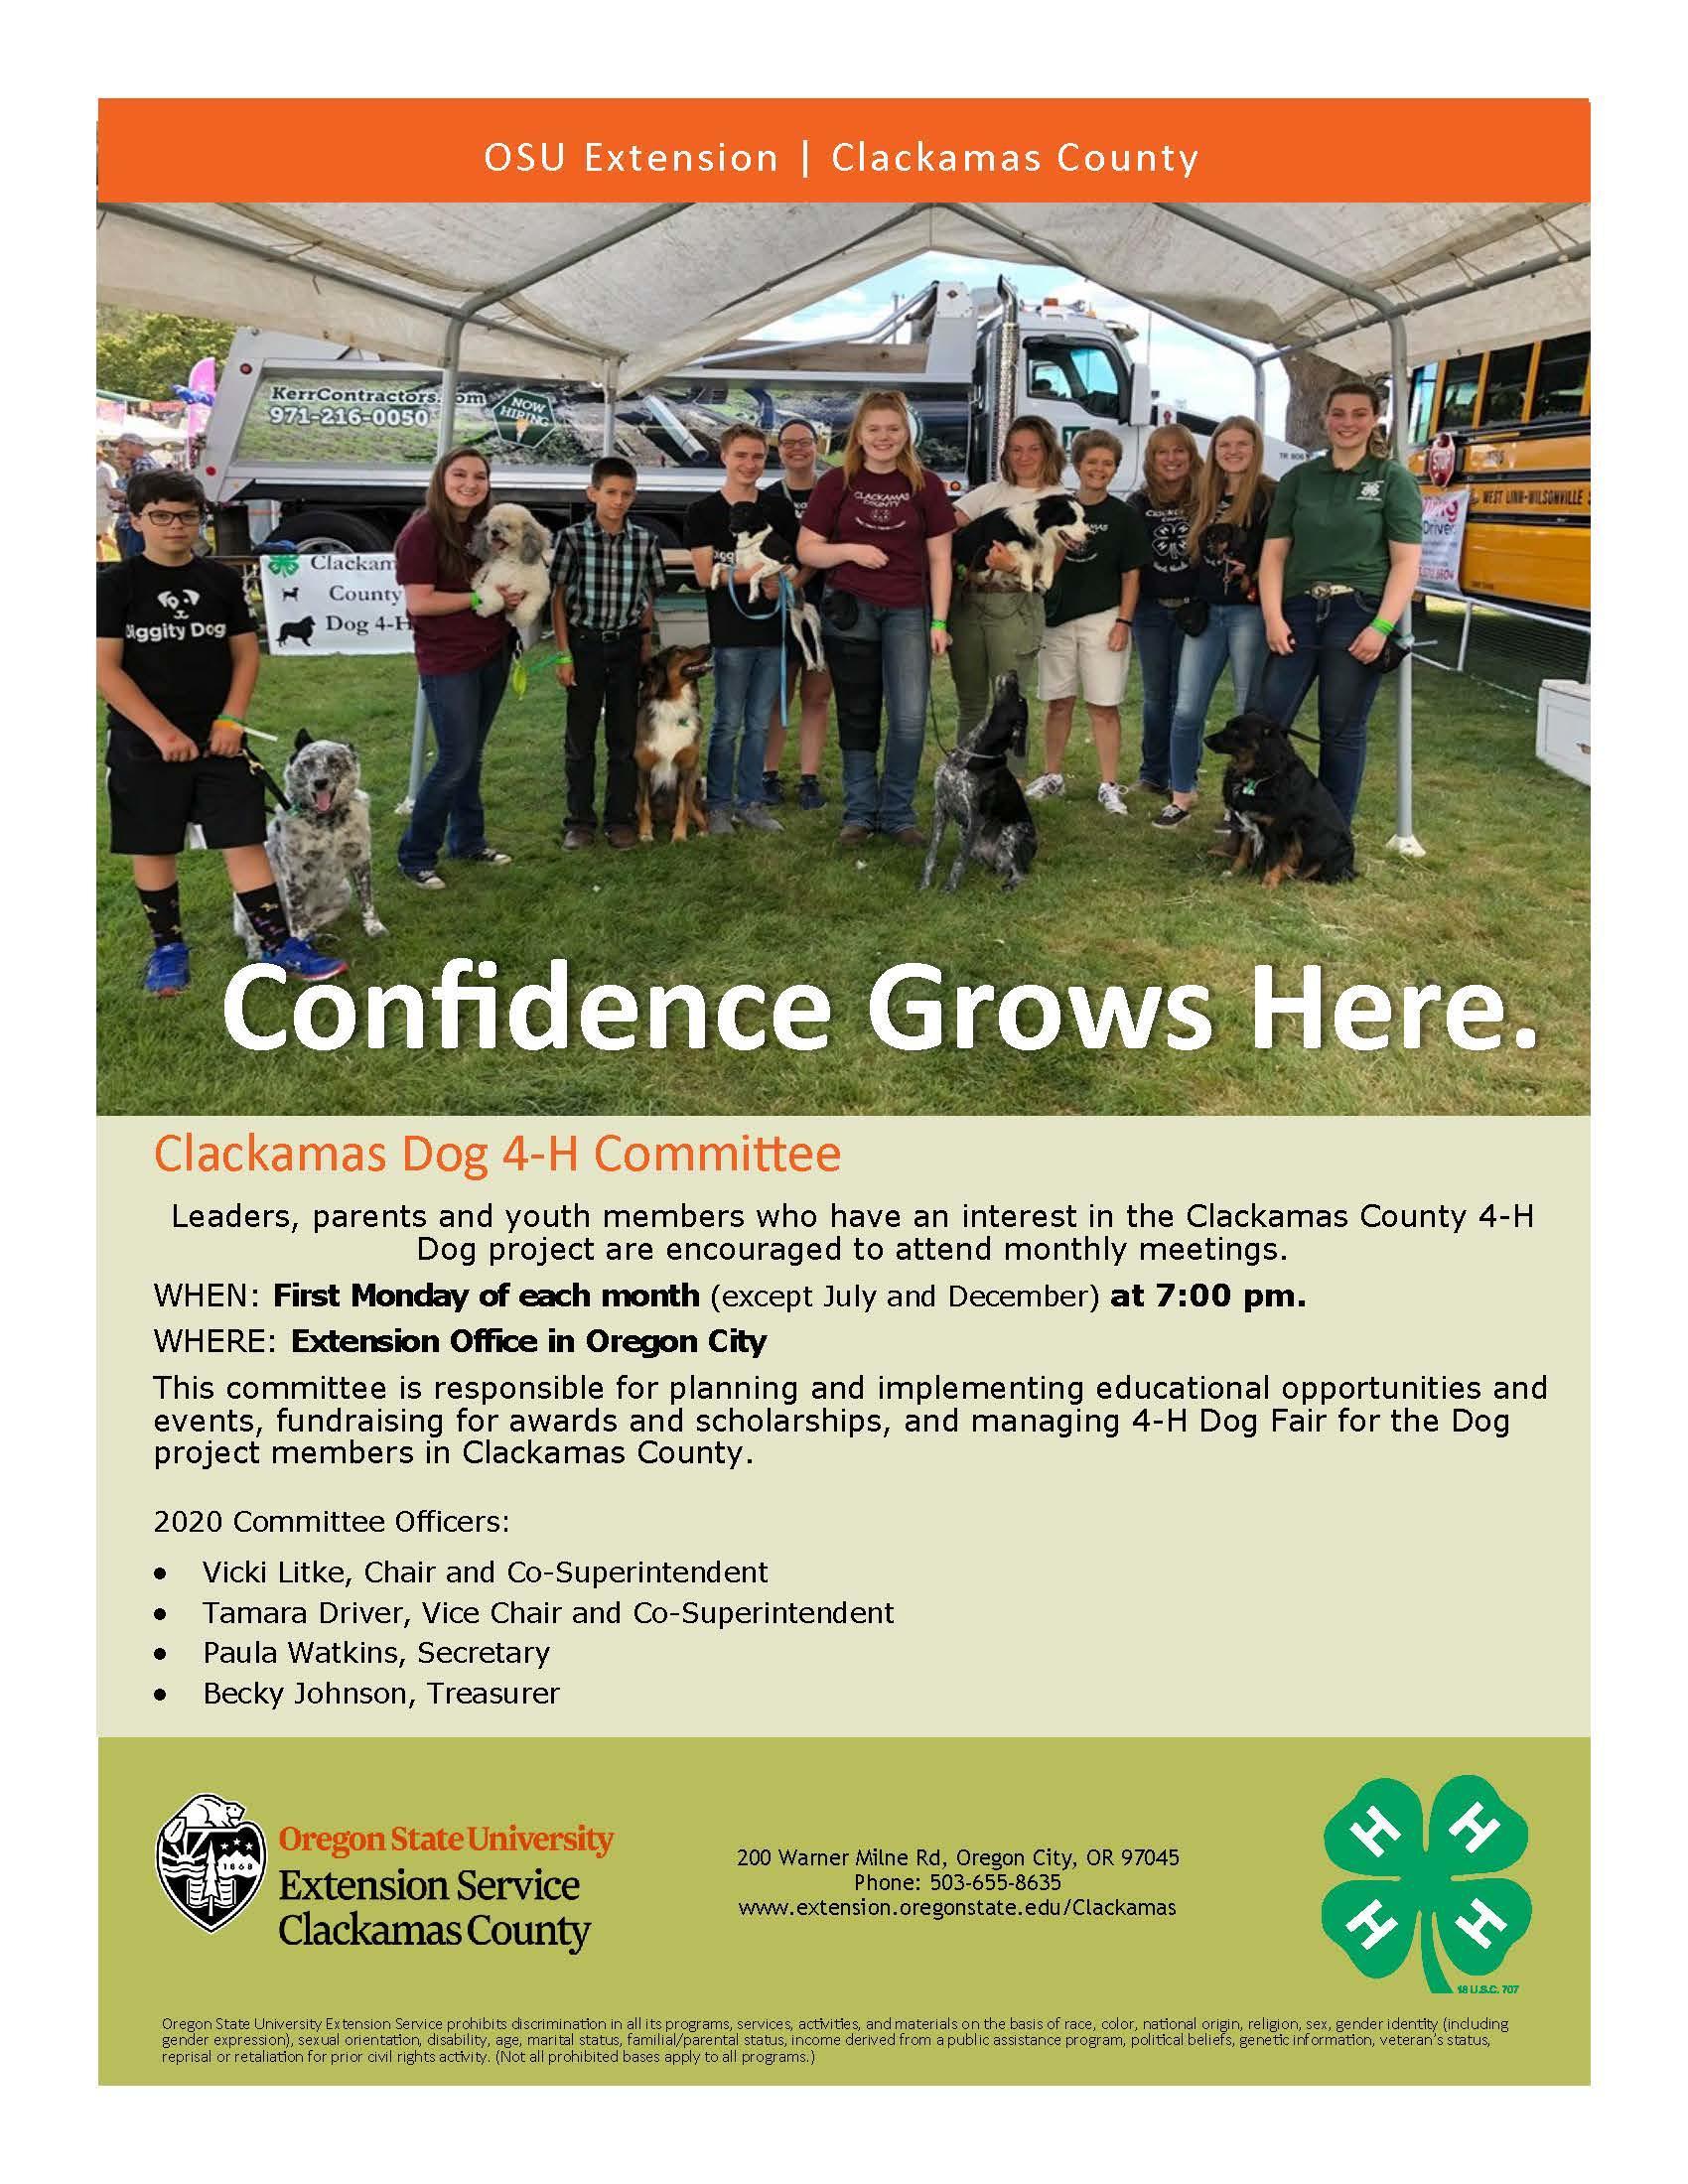 Clackamas County 4-H Dog Committee Information flyer